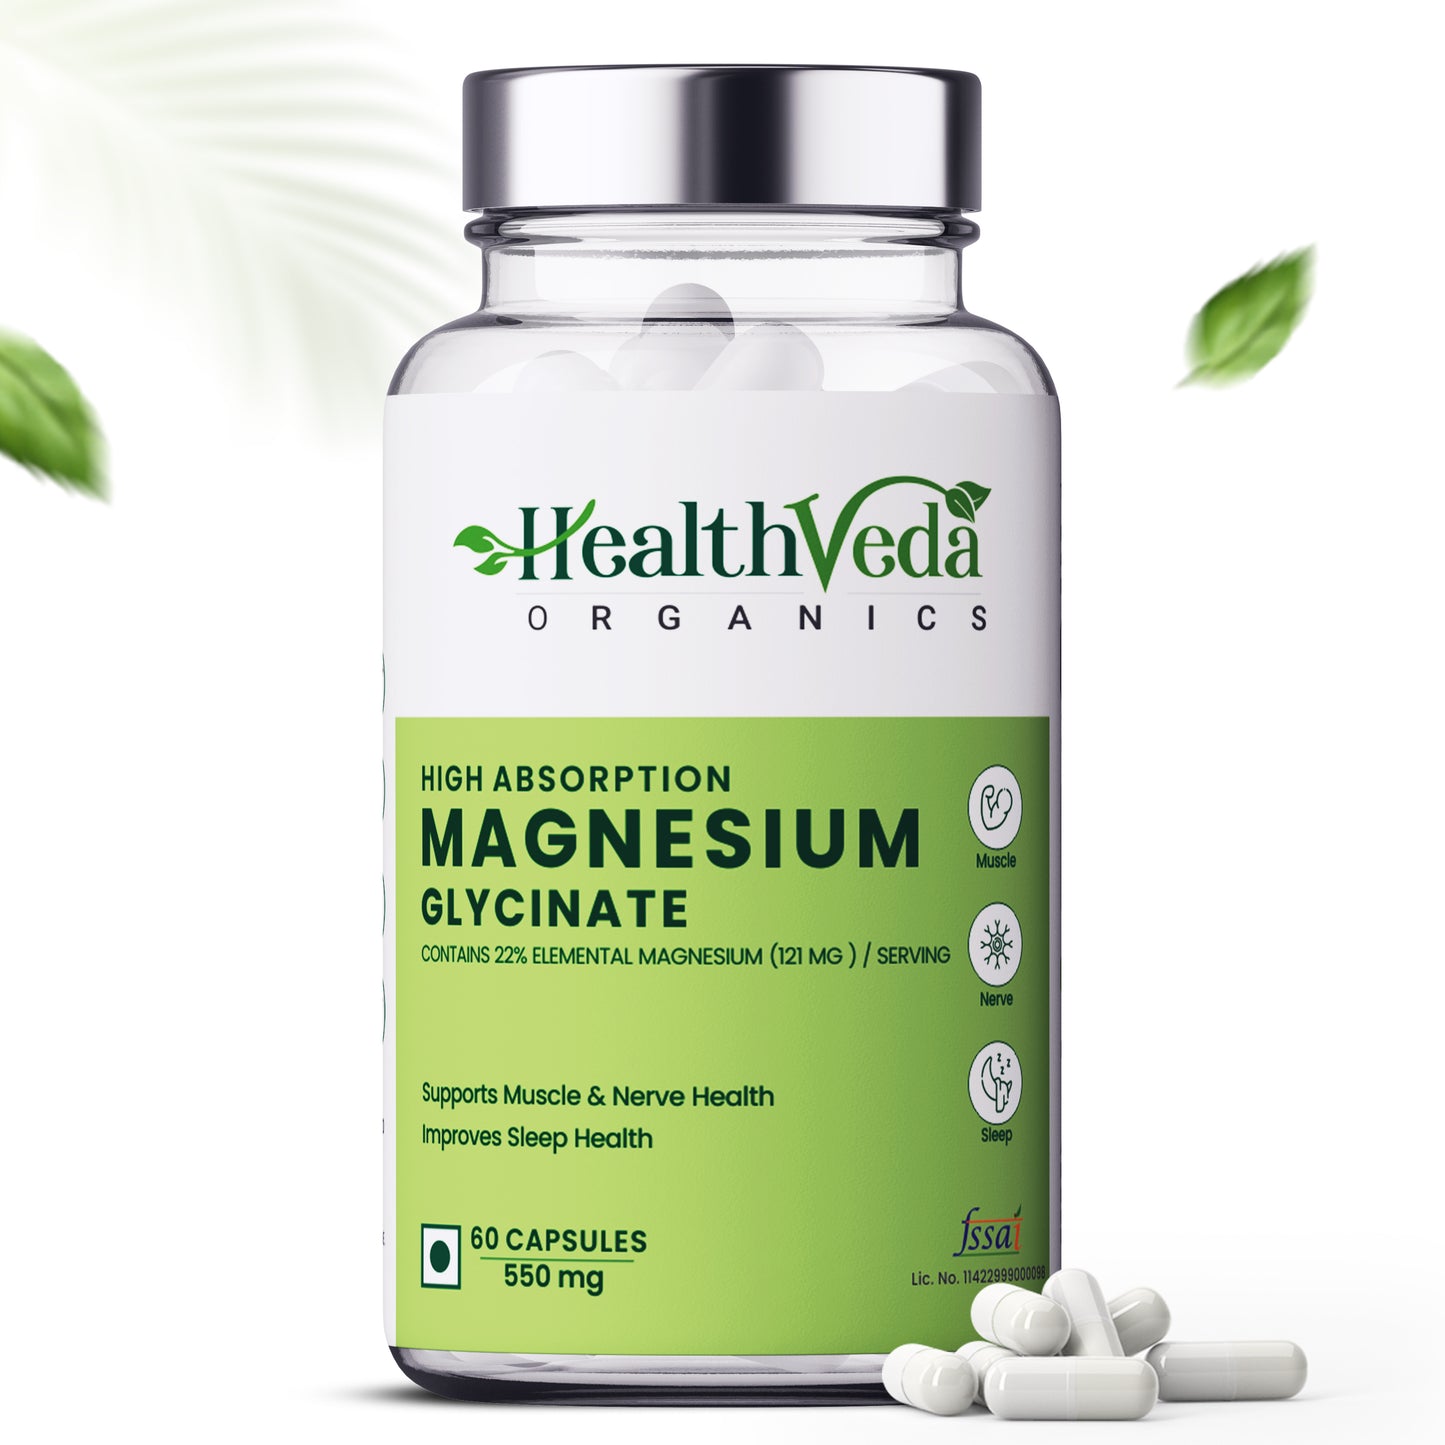 Health Veda Organics High Absorption Magnesium Glycinate, 550mg | 60 Veg Capsules | Supports Nerve & Muscle Health